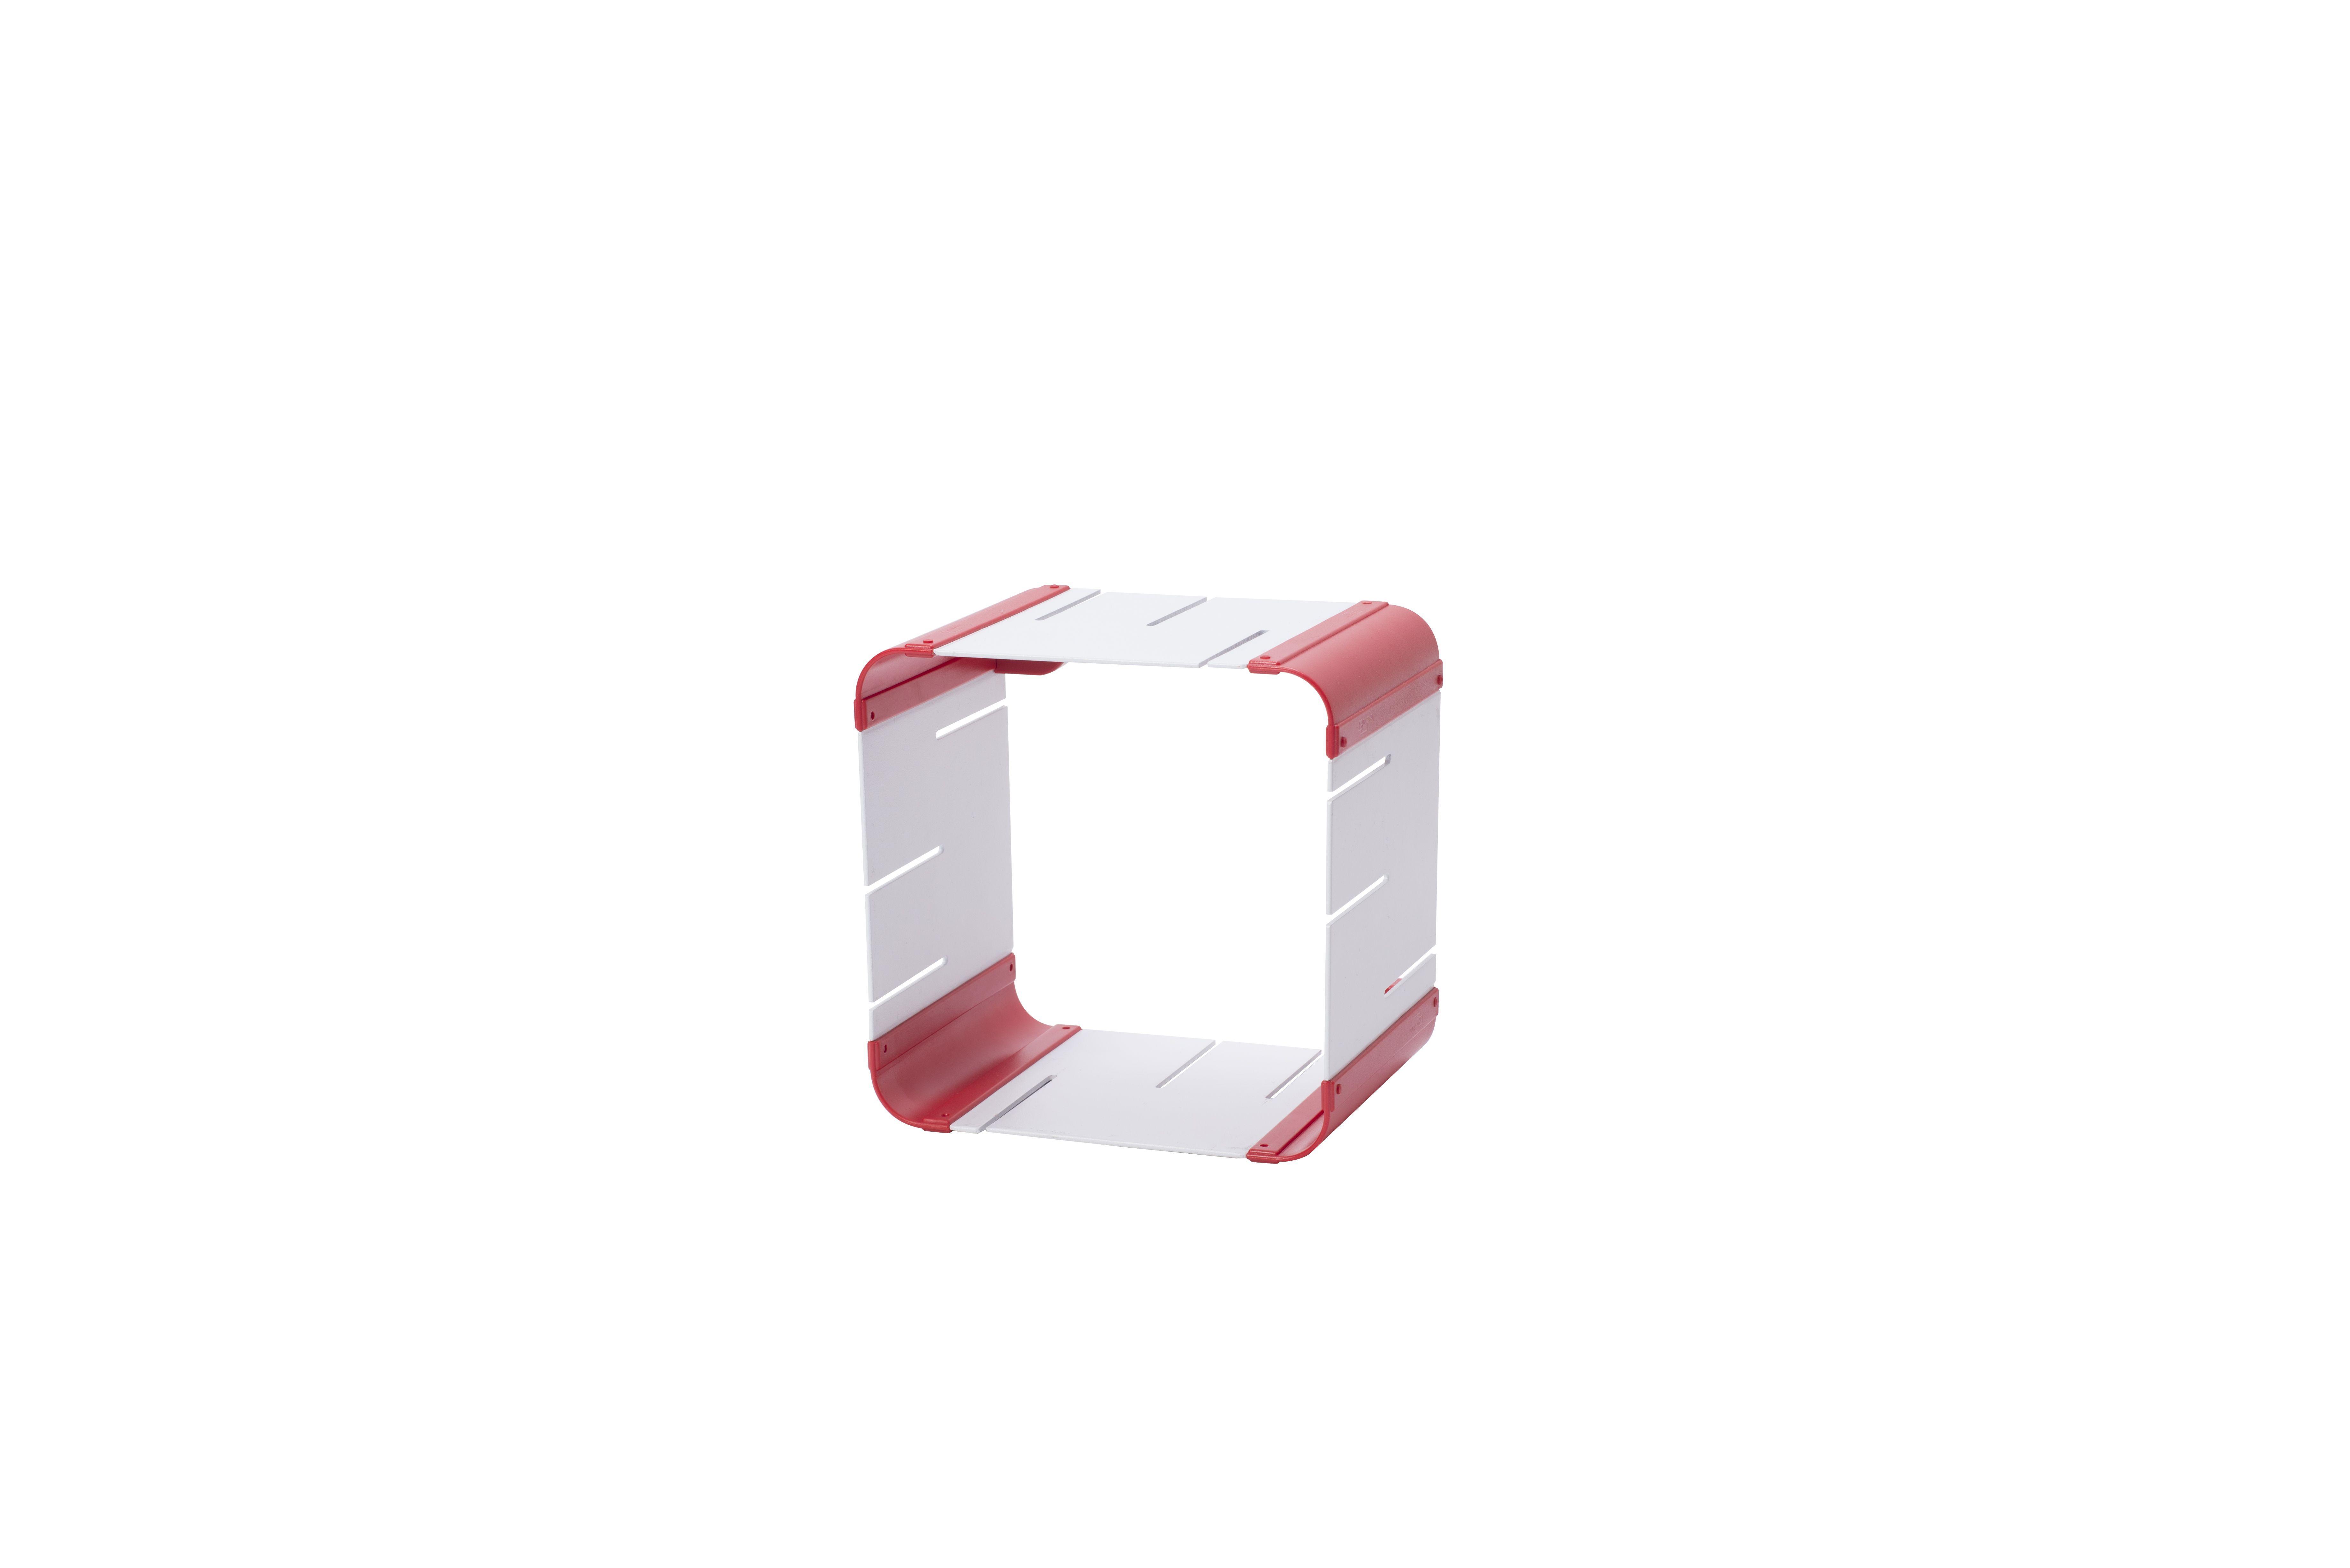 White and Red Corner Logo - Website – FlexiCube Knock-down Storage Unit: White With Red Corner ...